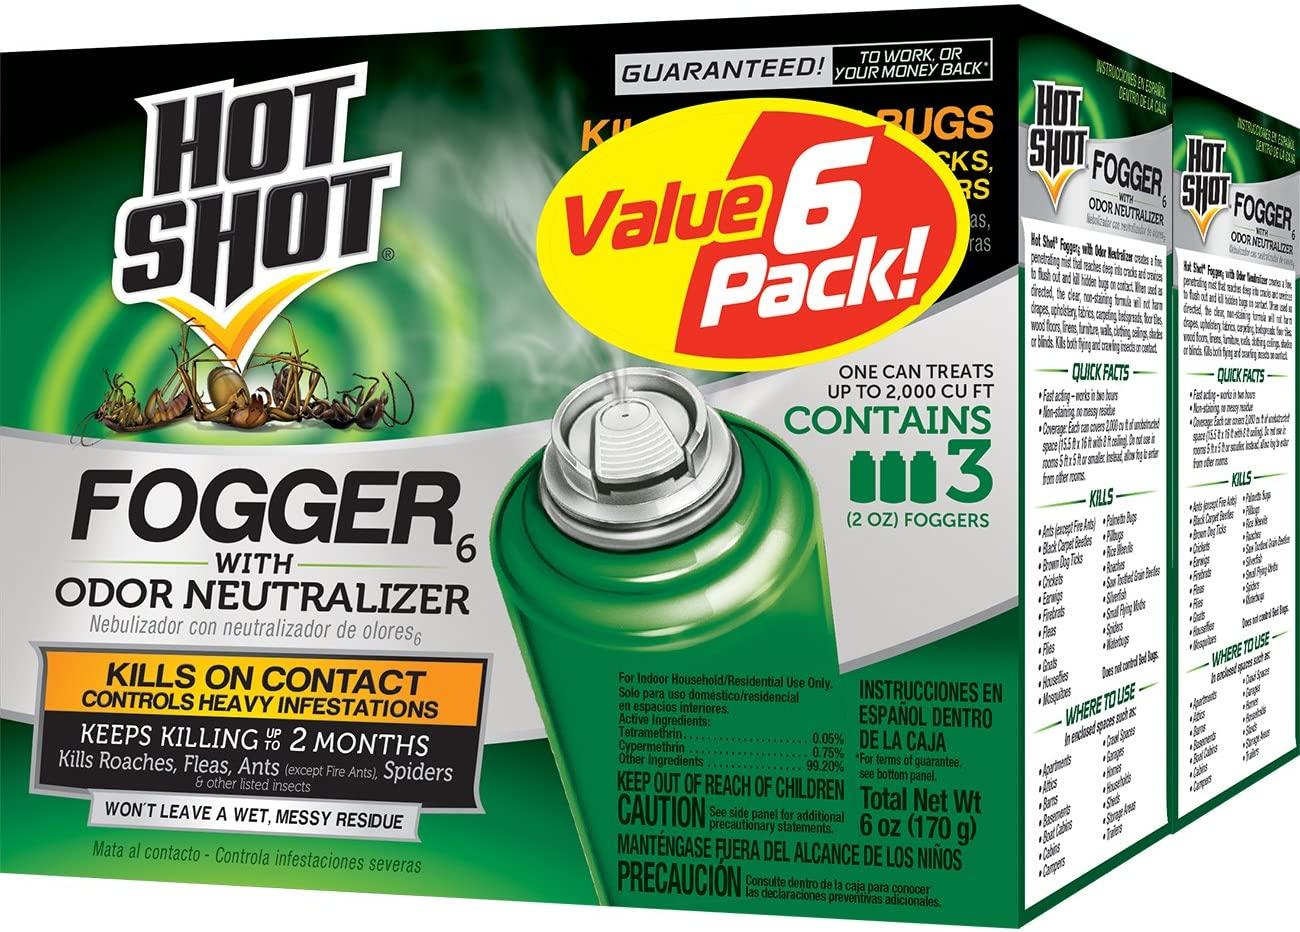 6 Hot Shot Fogger with Odor Neutralizer Foggers for $12.89